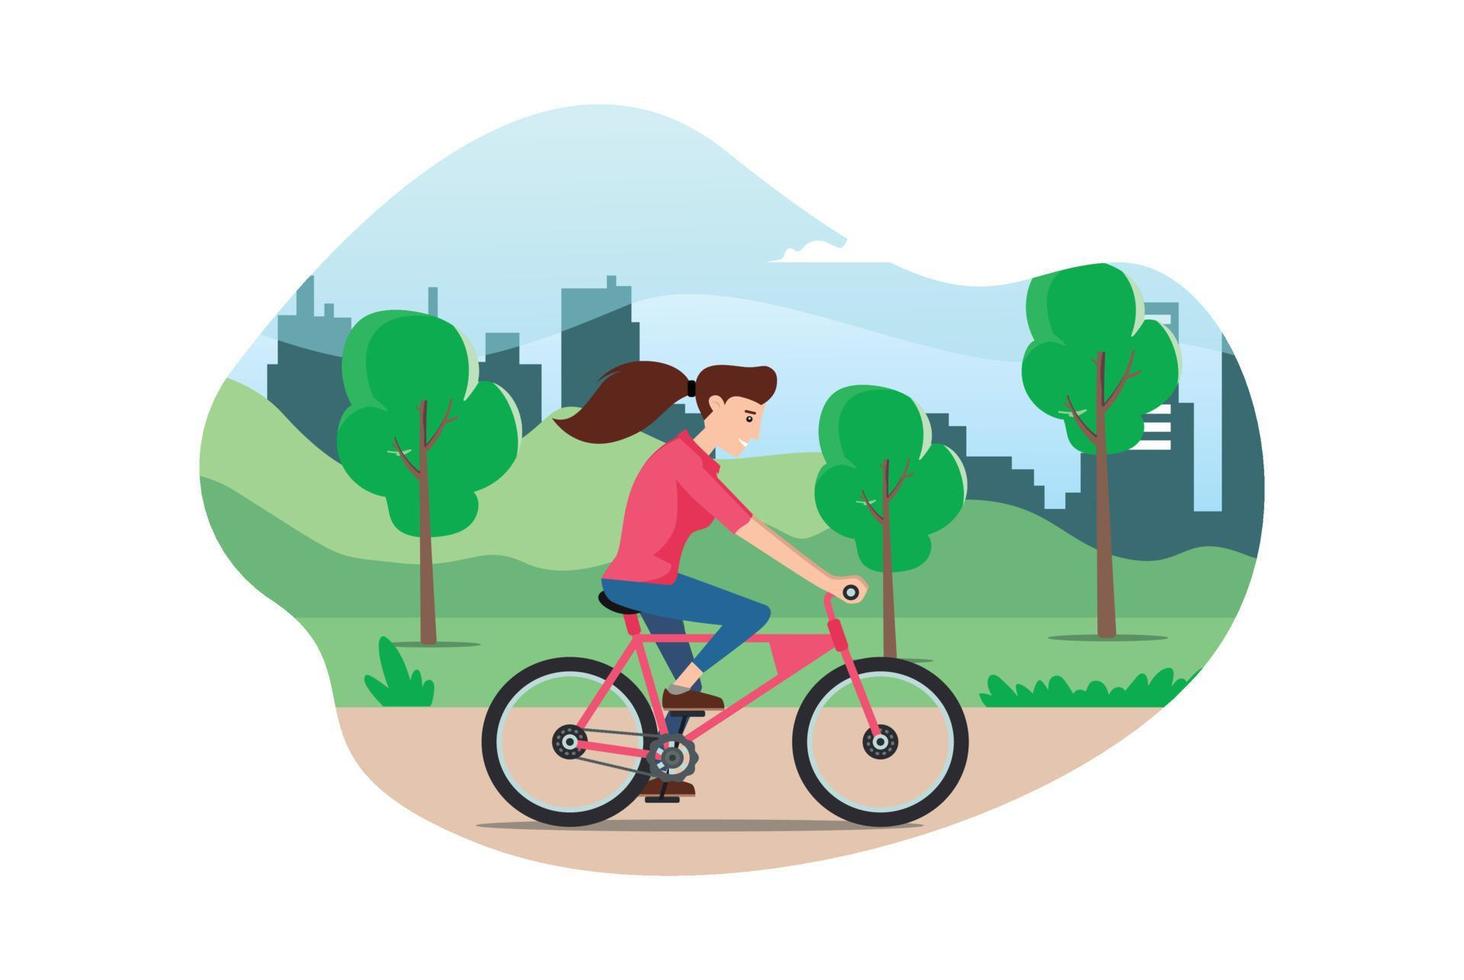 Young people rides a sports bike on a park road, Vector Illustration Suitable for Diagrams, Infographics, Game Asset, And Other Graphic Asset